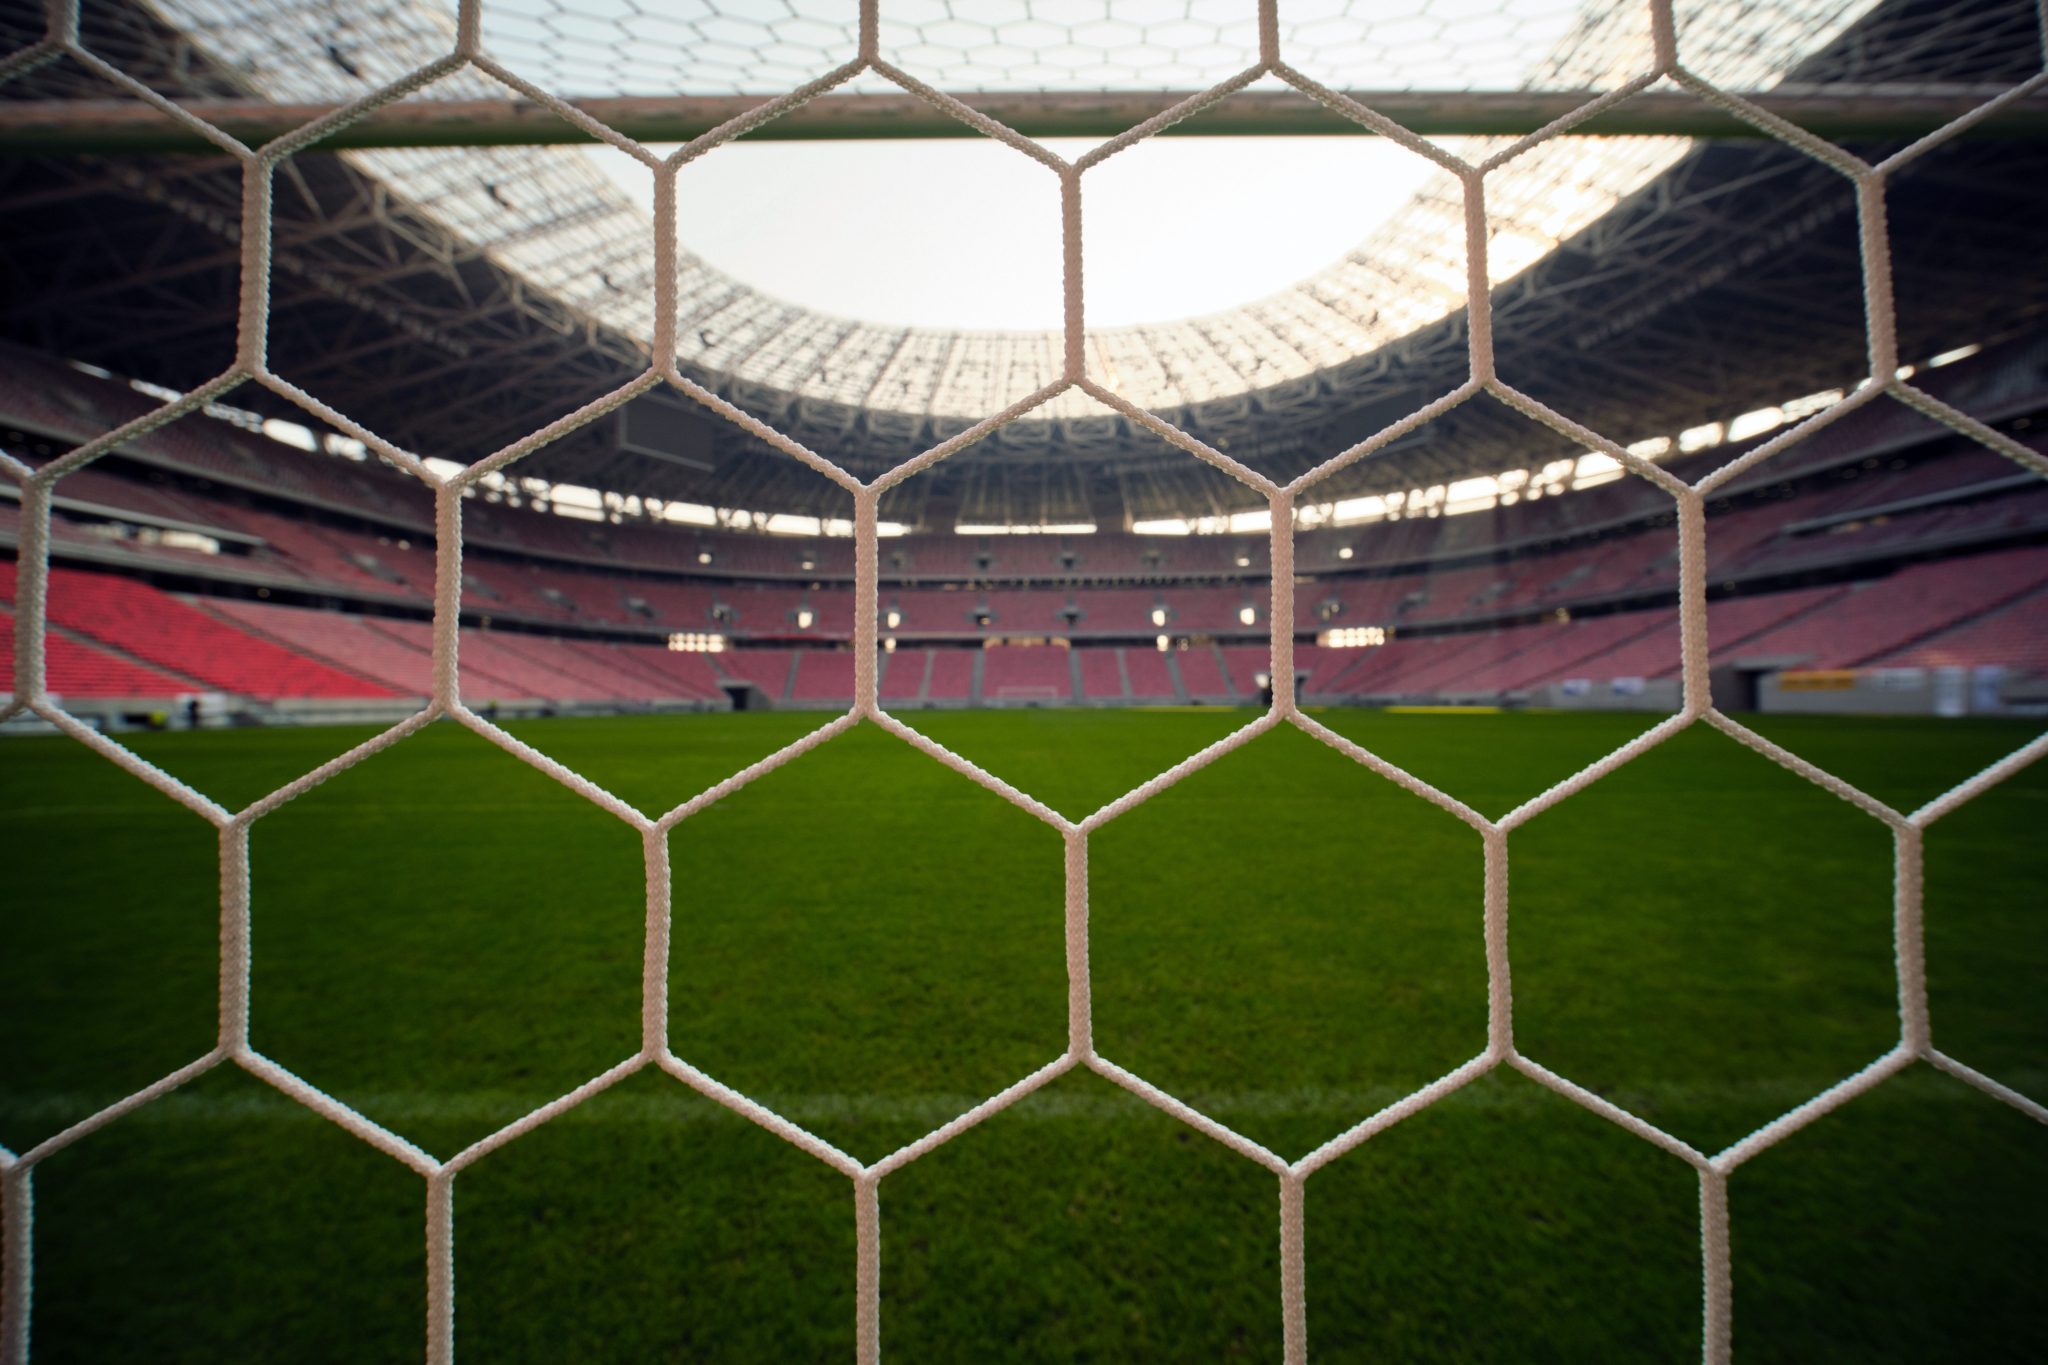 Gov't: Hungary Ready to Host Champions League Final in New Puskás Arena -  Hungary Today